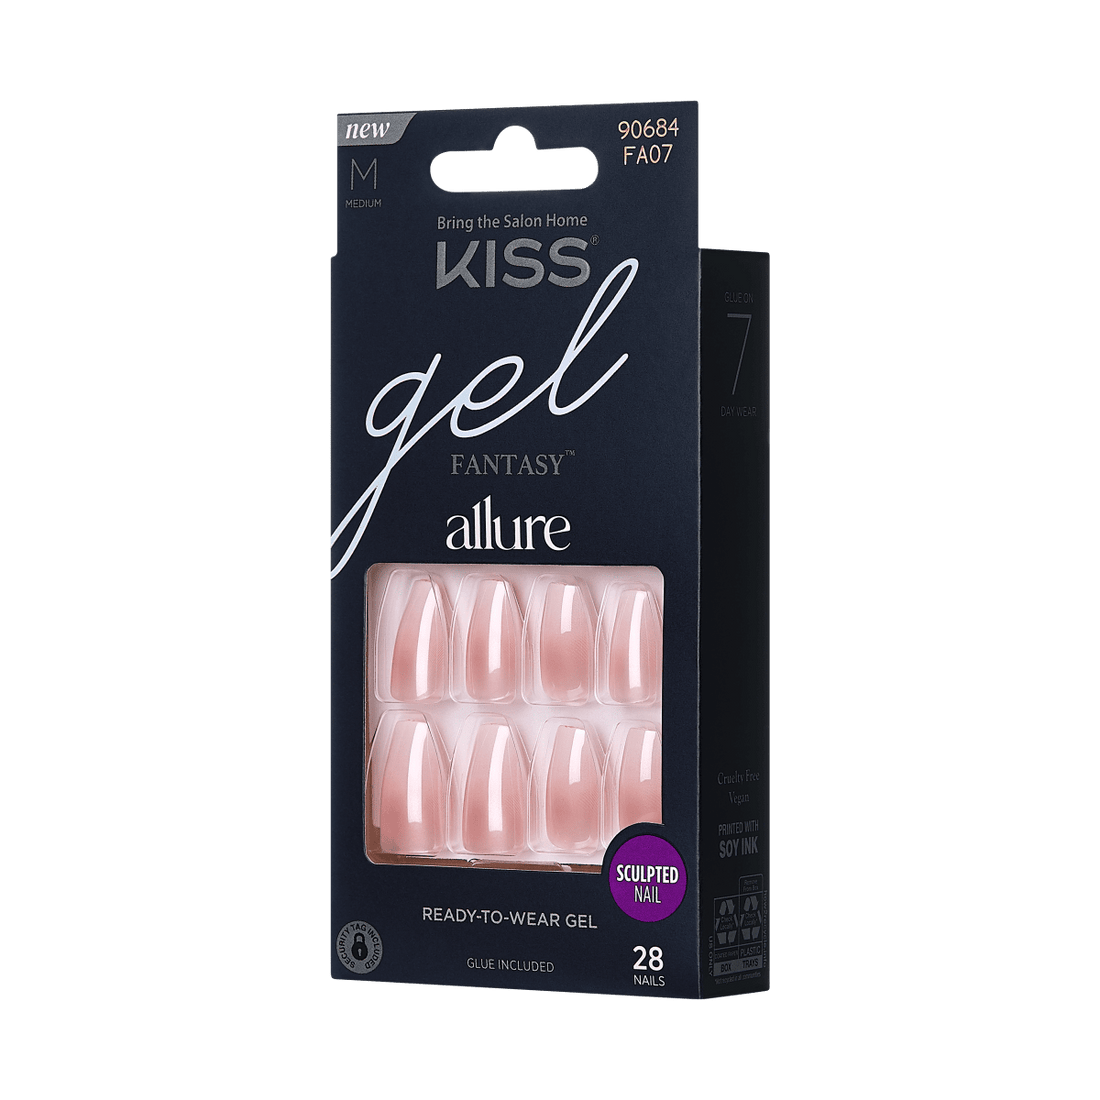 KISS Gel Fantasy, Press-On Nails, Essential, Pink, Med Coffin, 28ct